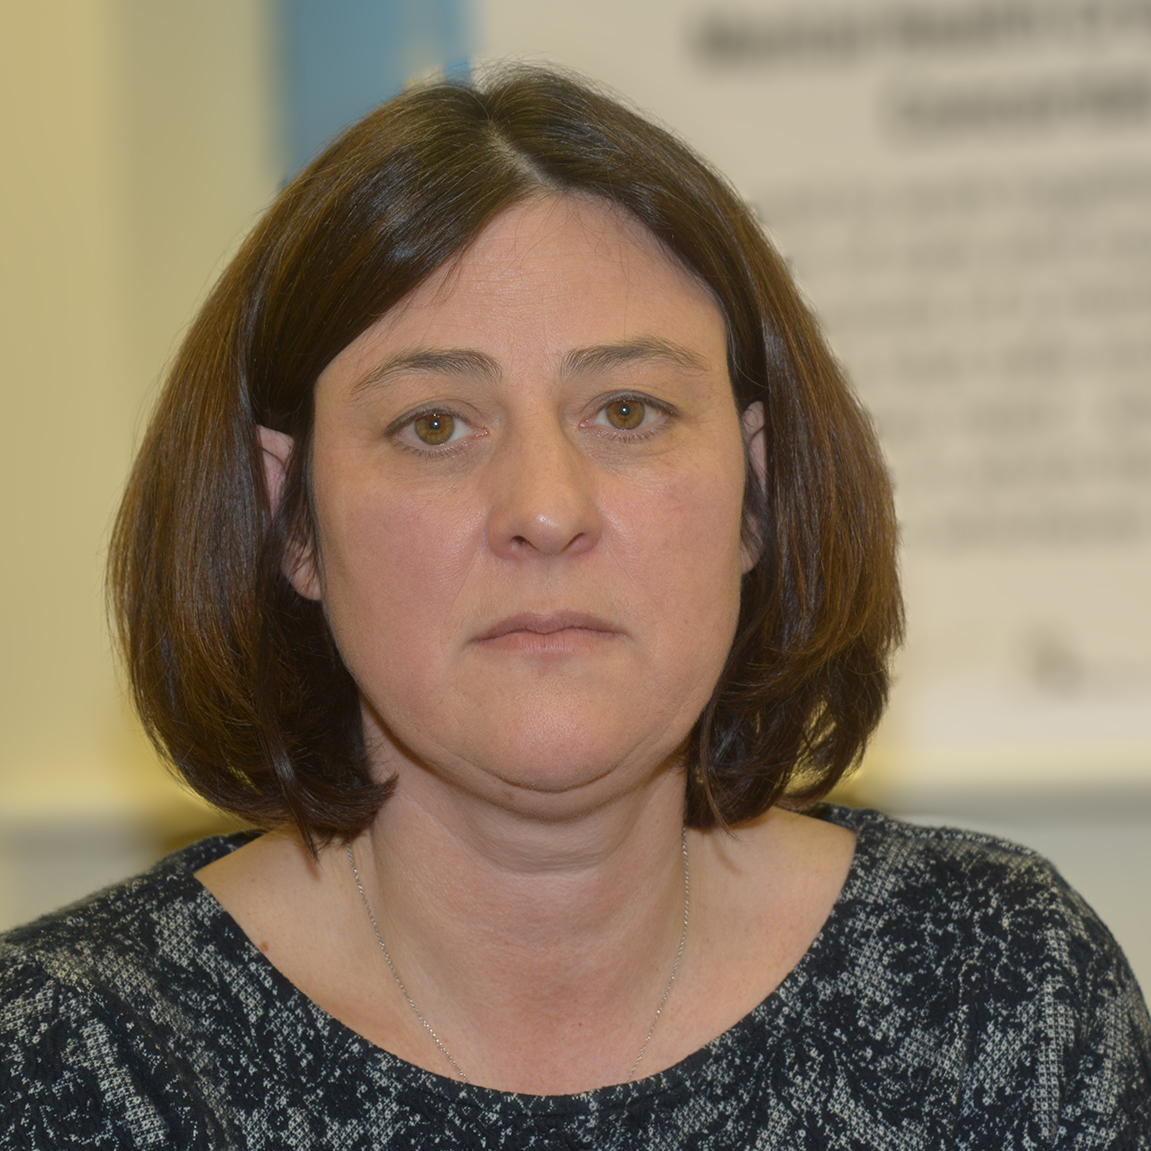 Julia Mulligan Responds To Report On Use Of Section 136 Places Of Safety Police Fire And